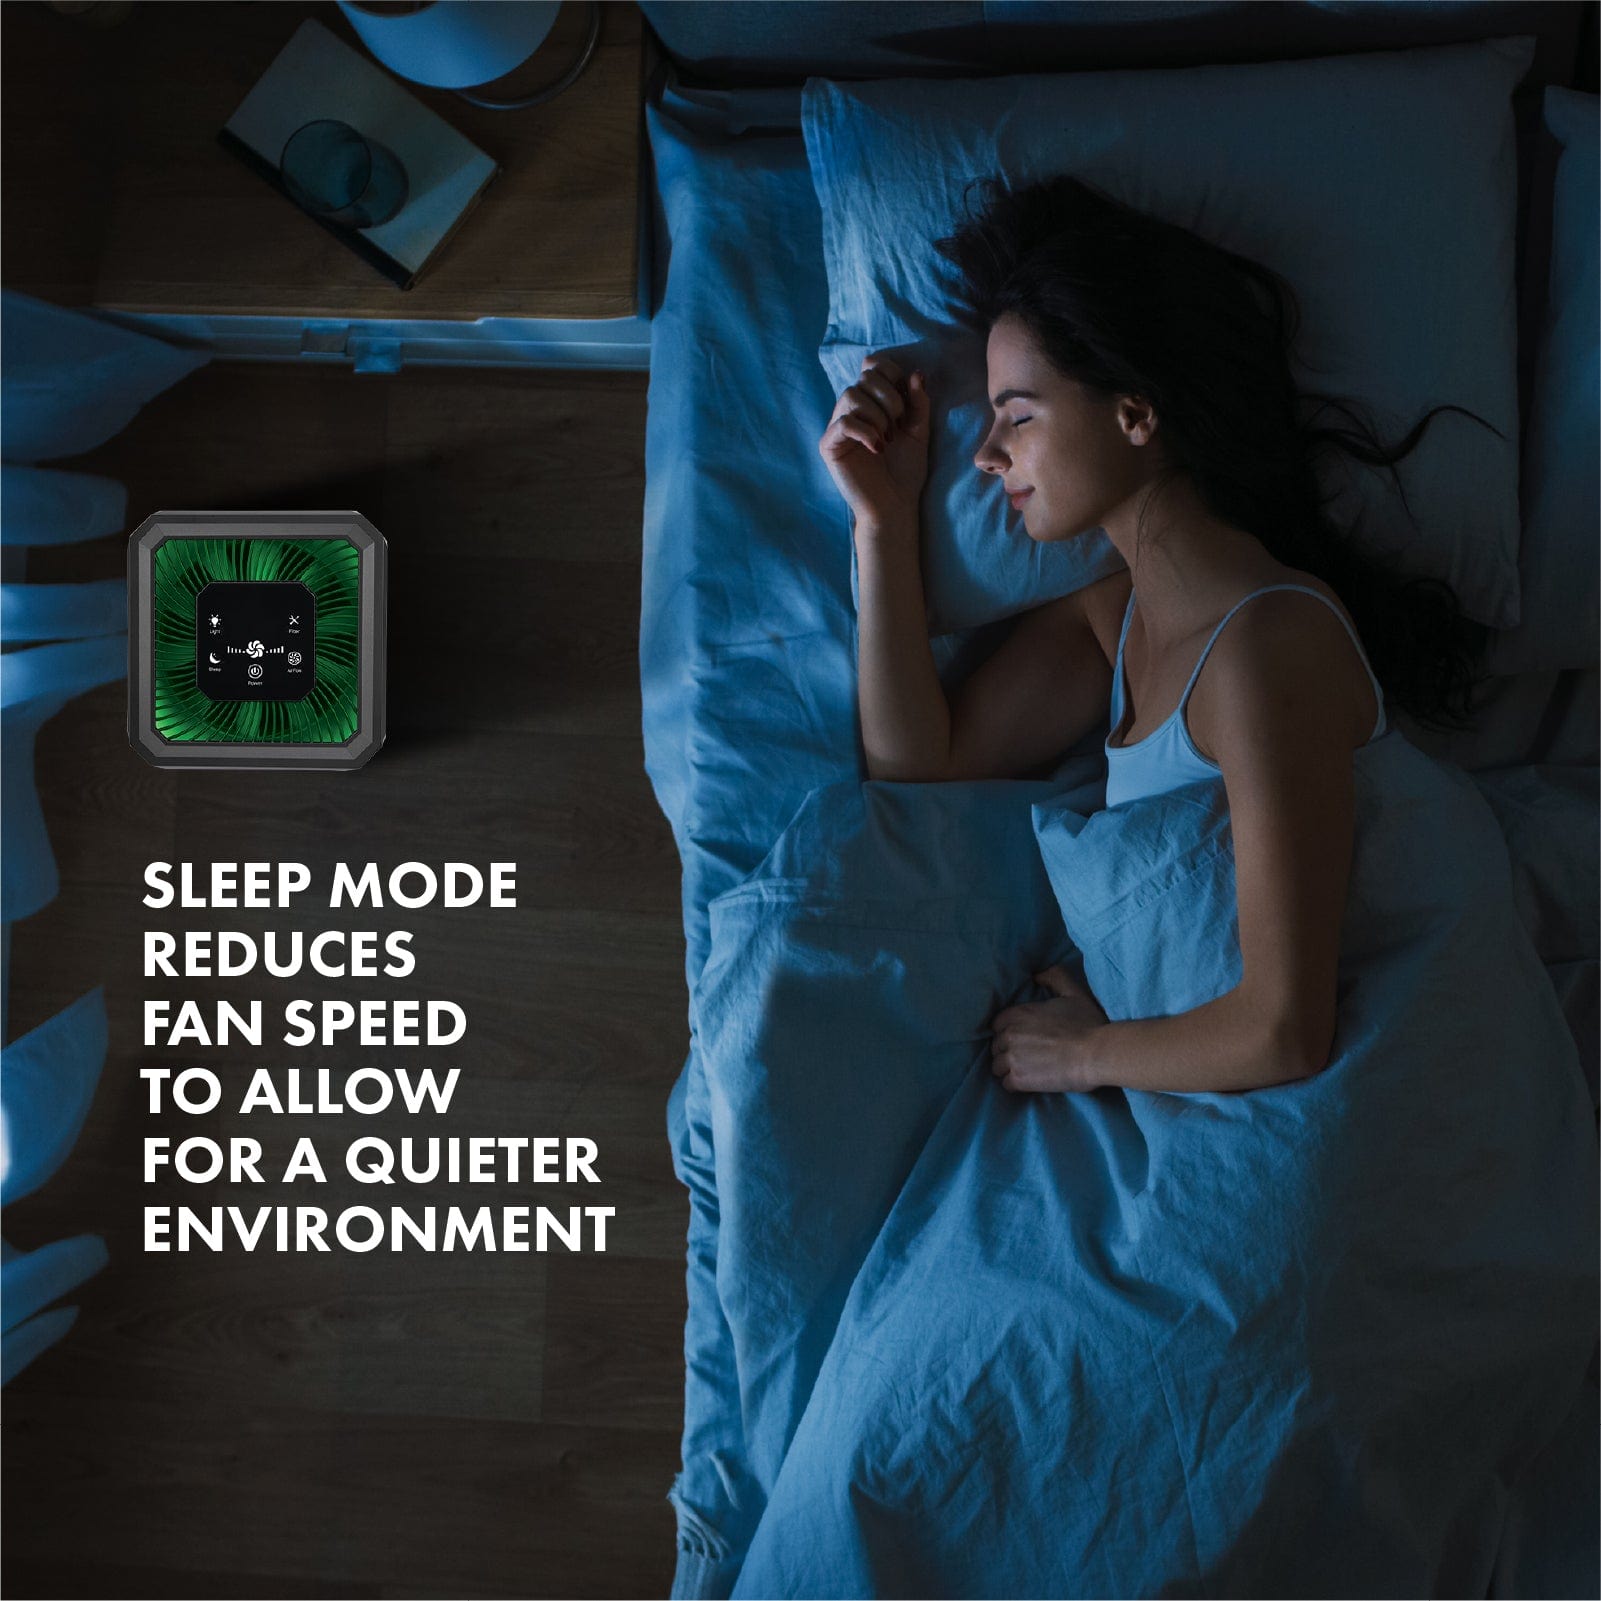 Sleep mode reduces fan speed to allow for a quieter enviornment.